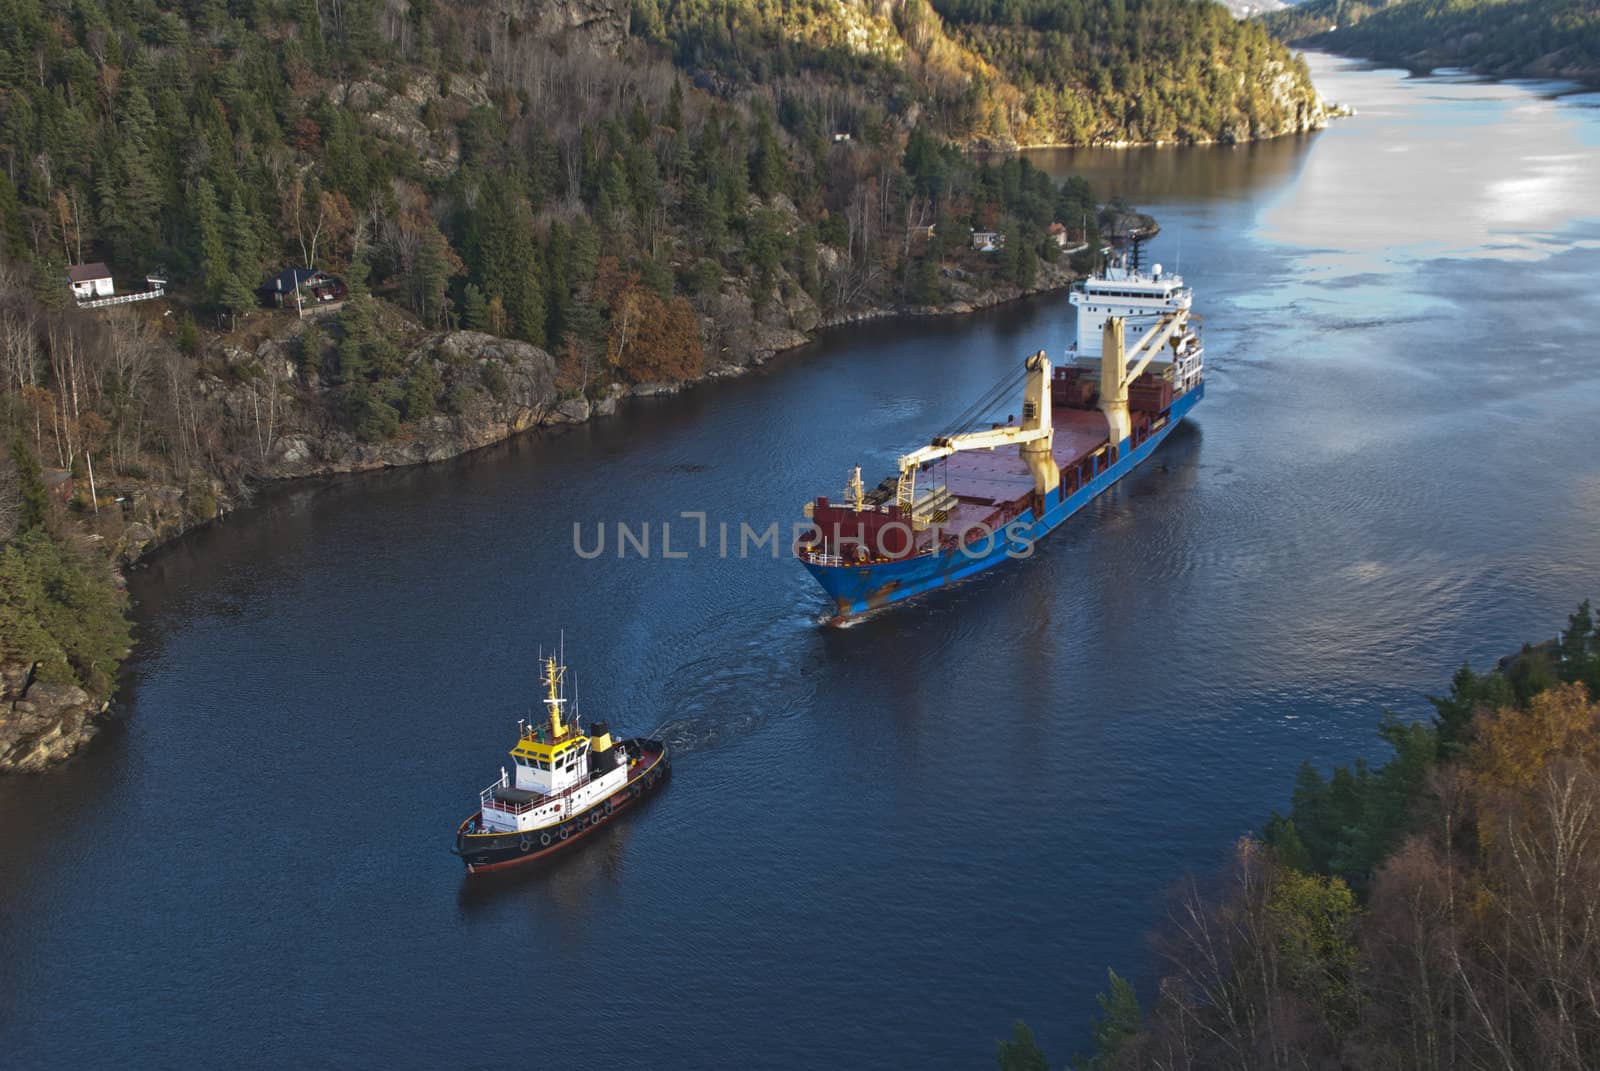 when it comes so large ships as bbc europe in ringdalsfjord they must have towing assistance to get out to the open sea and then comes little tug herbert of benefit